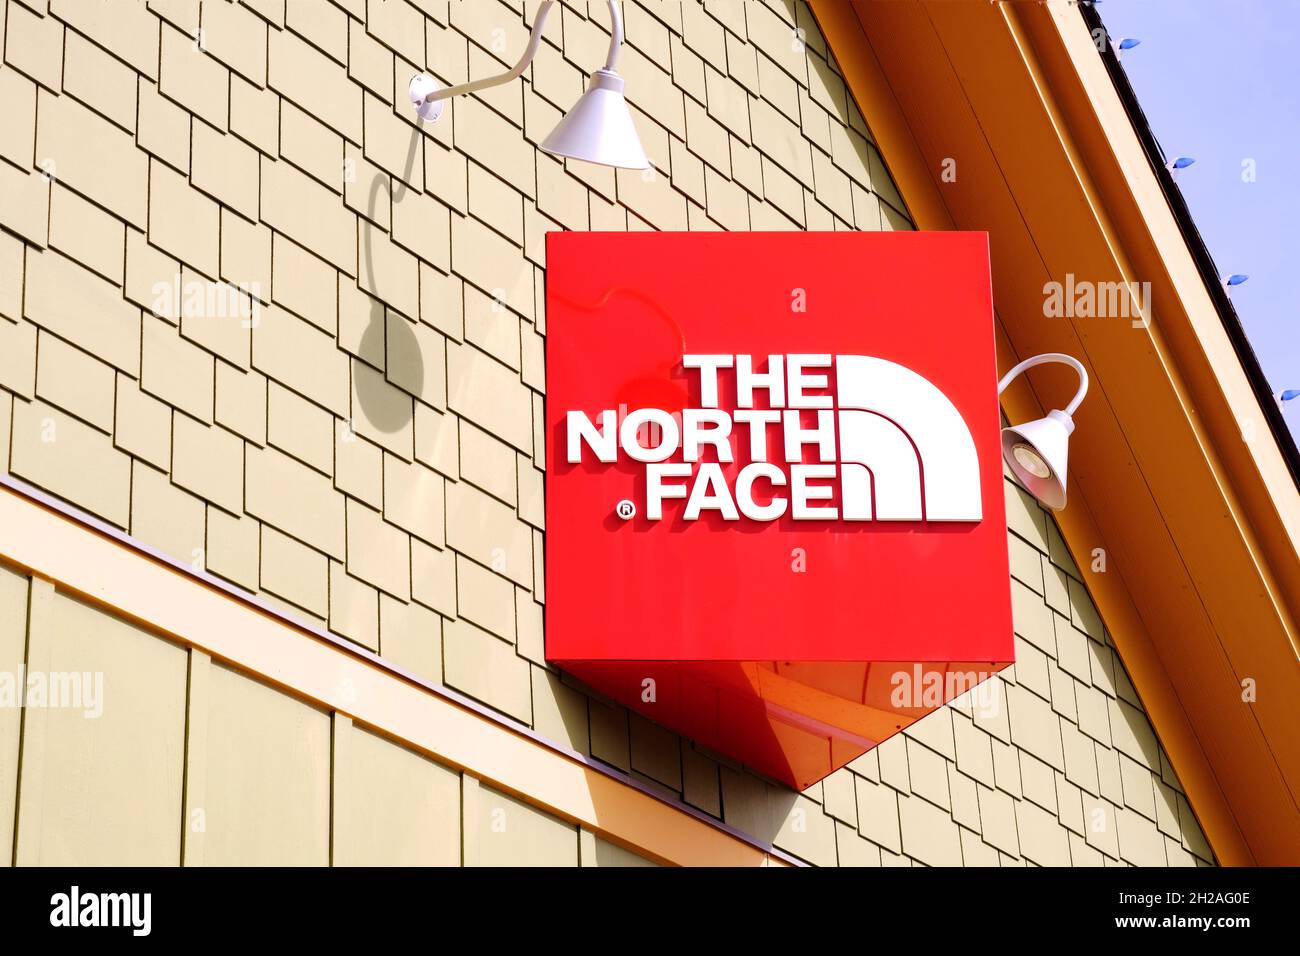 The north face store at Blue Mountain resort. Logo and company name on decorative exterior wall. Chain retailer known for outerwear, apparel gear. Stock Photo